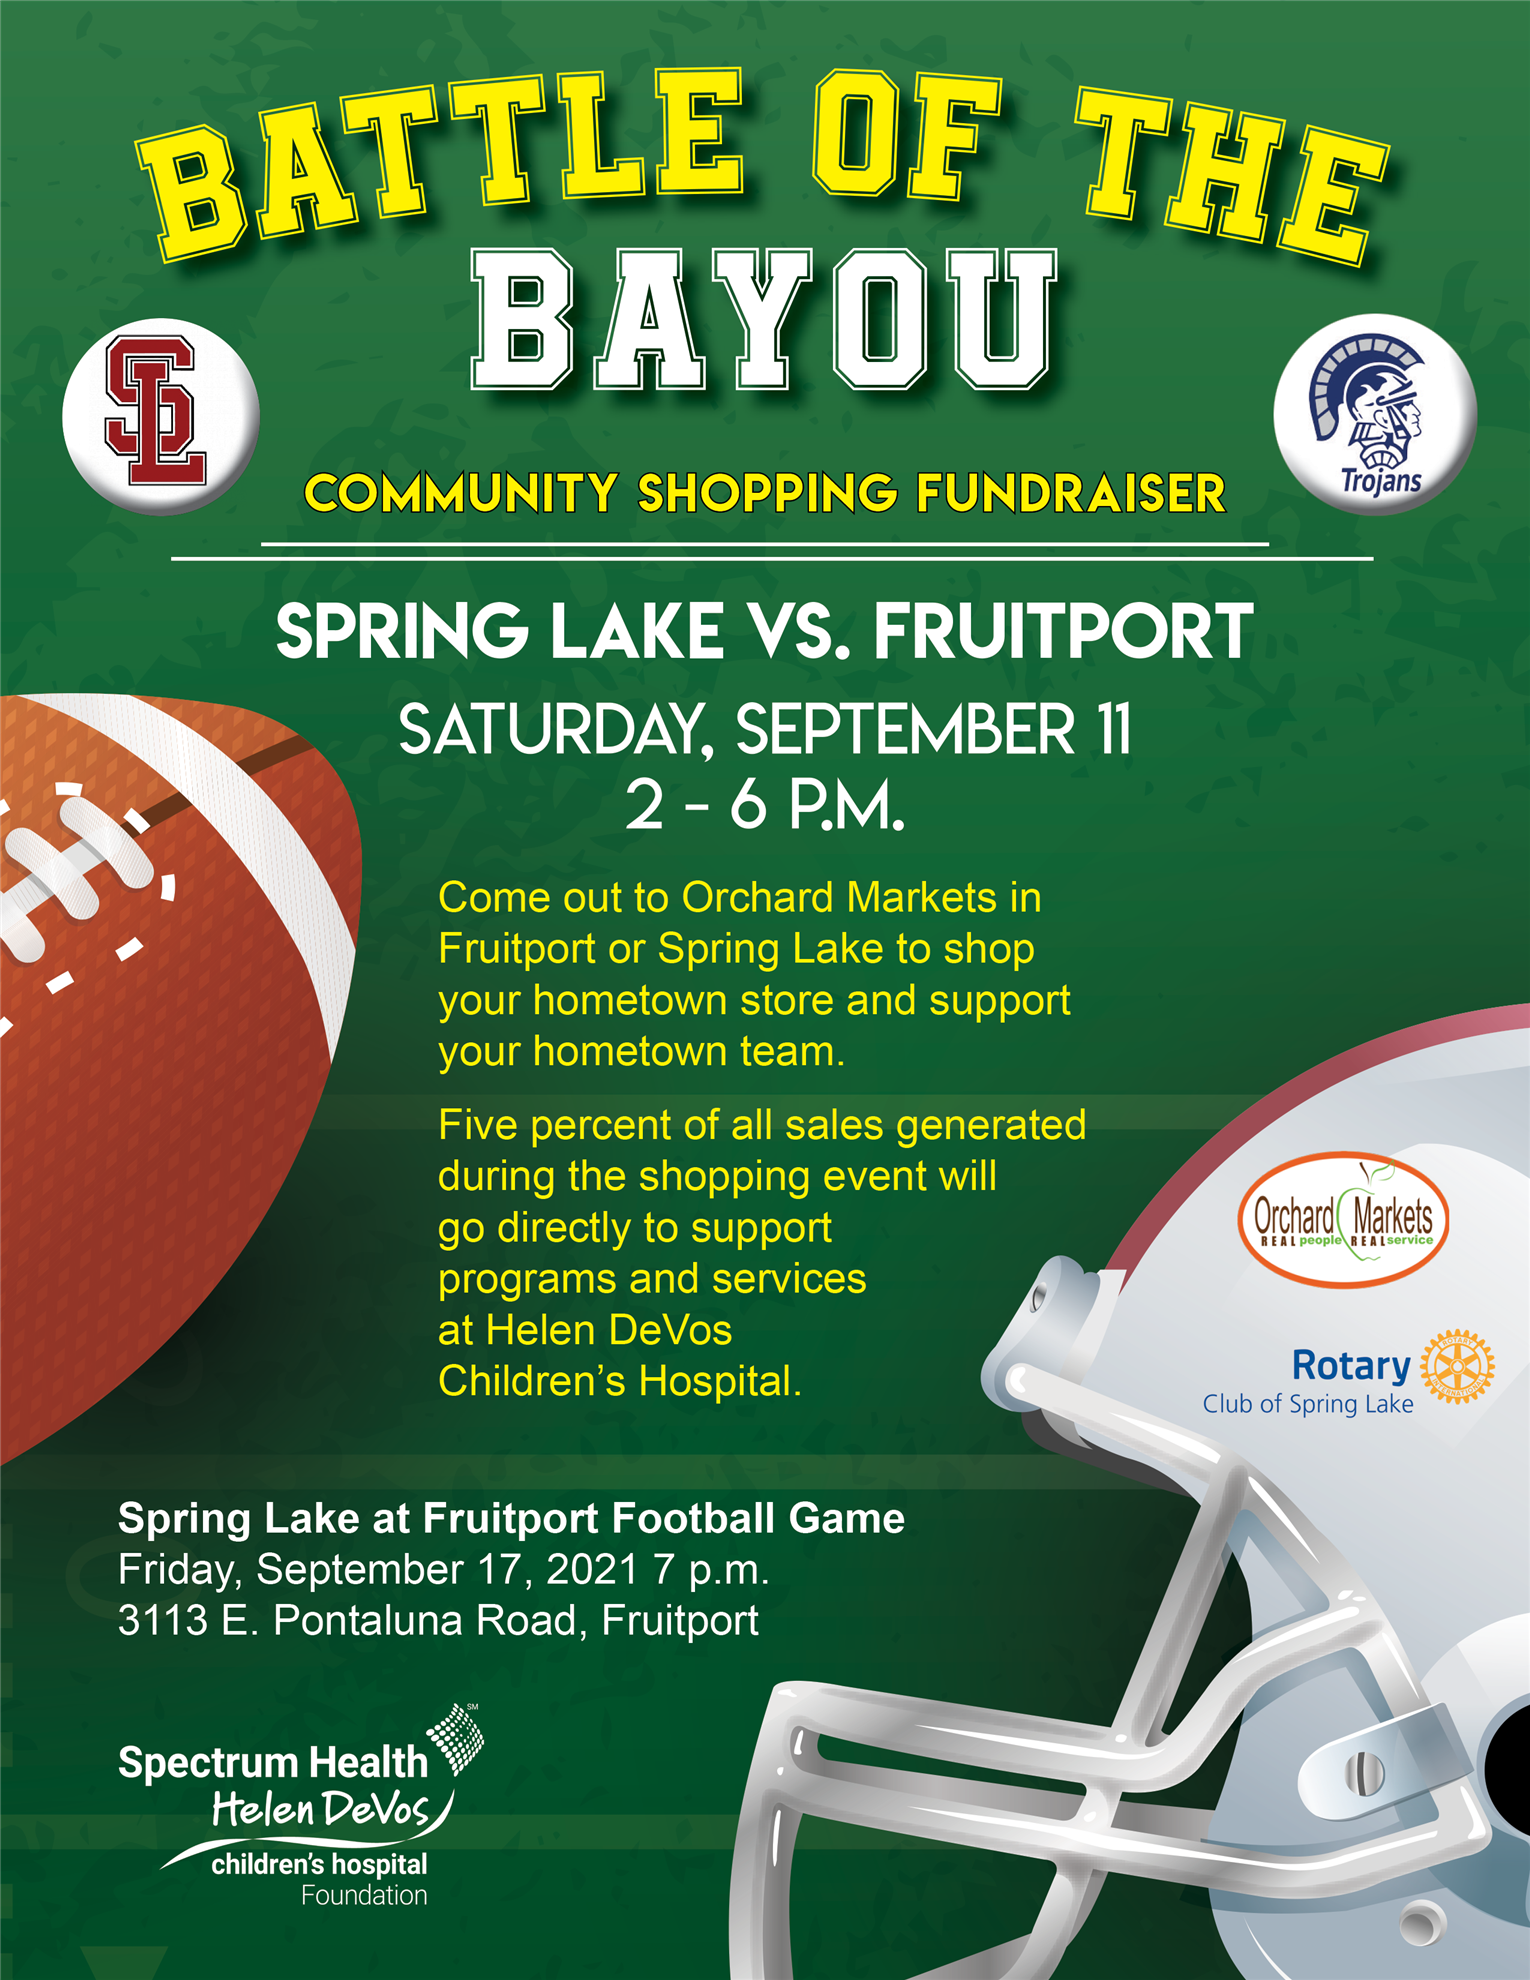 Battle of the Bayou 2021 Rotary Club of Spring Lake